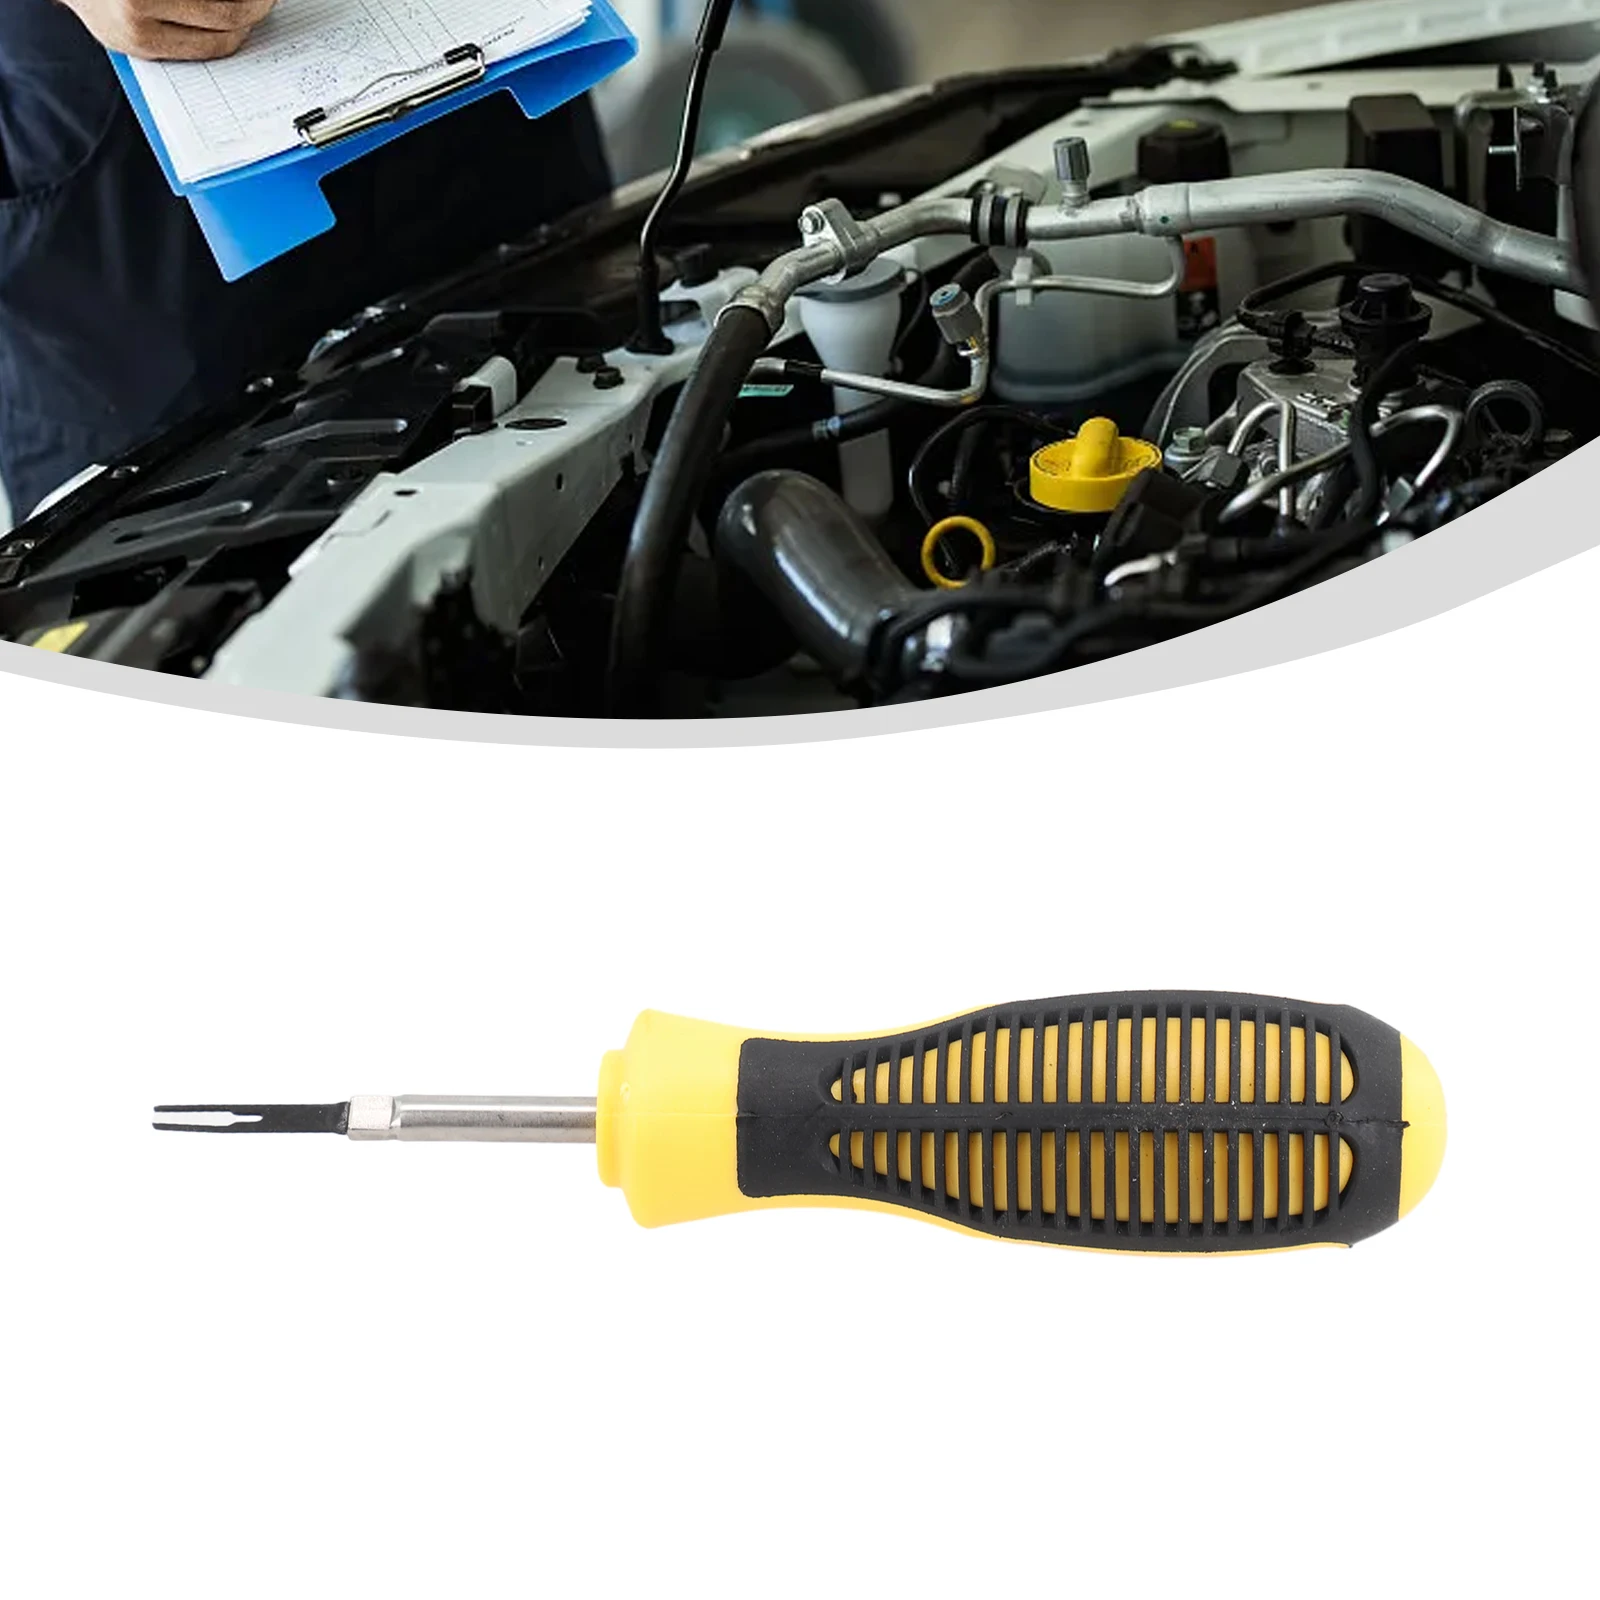 

Effortless Car Terminal Removal Tool Easily Extract Key Pin Wires with Precision Perfect for Car Enthusiasts